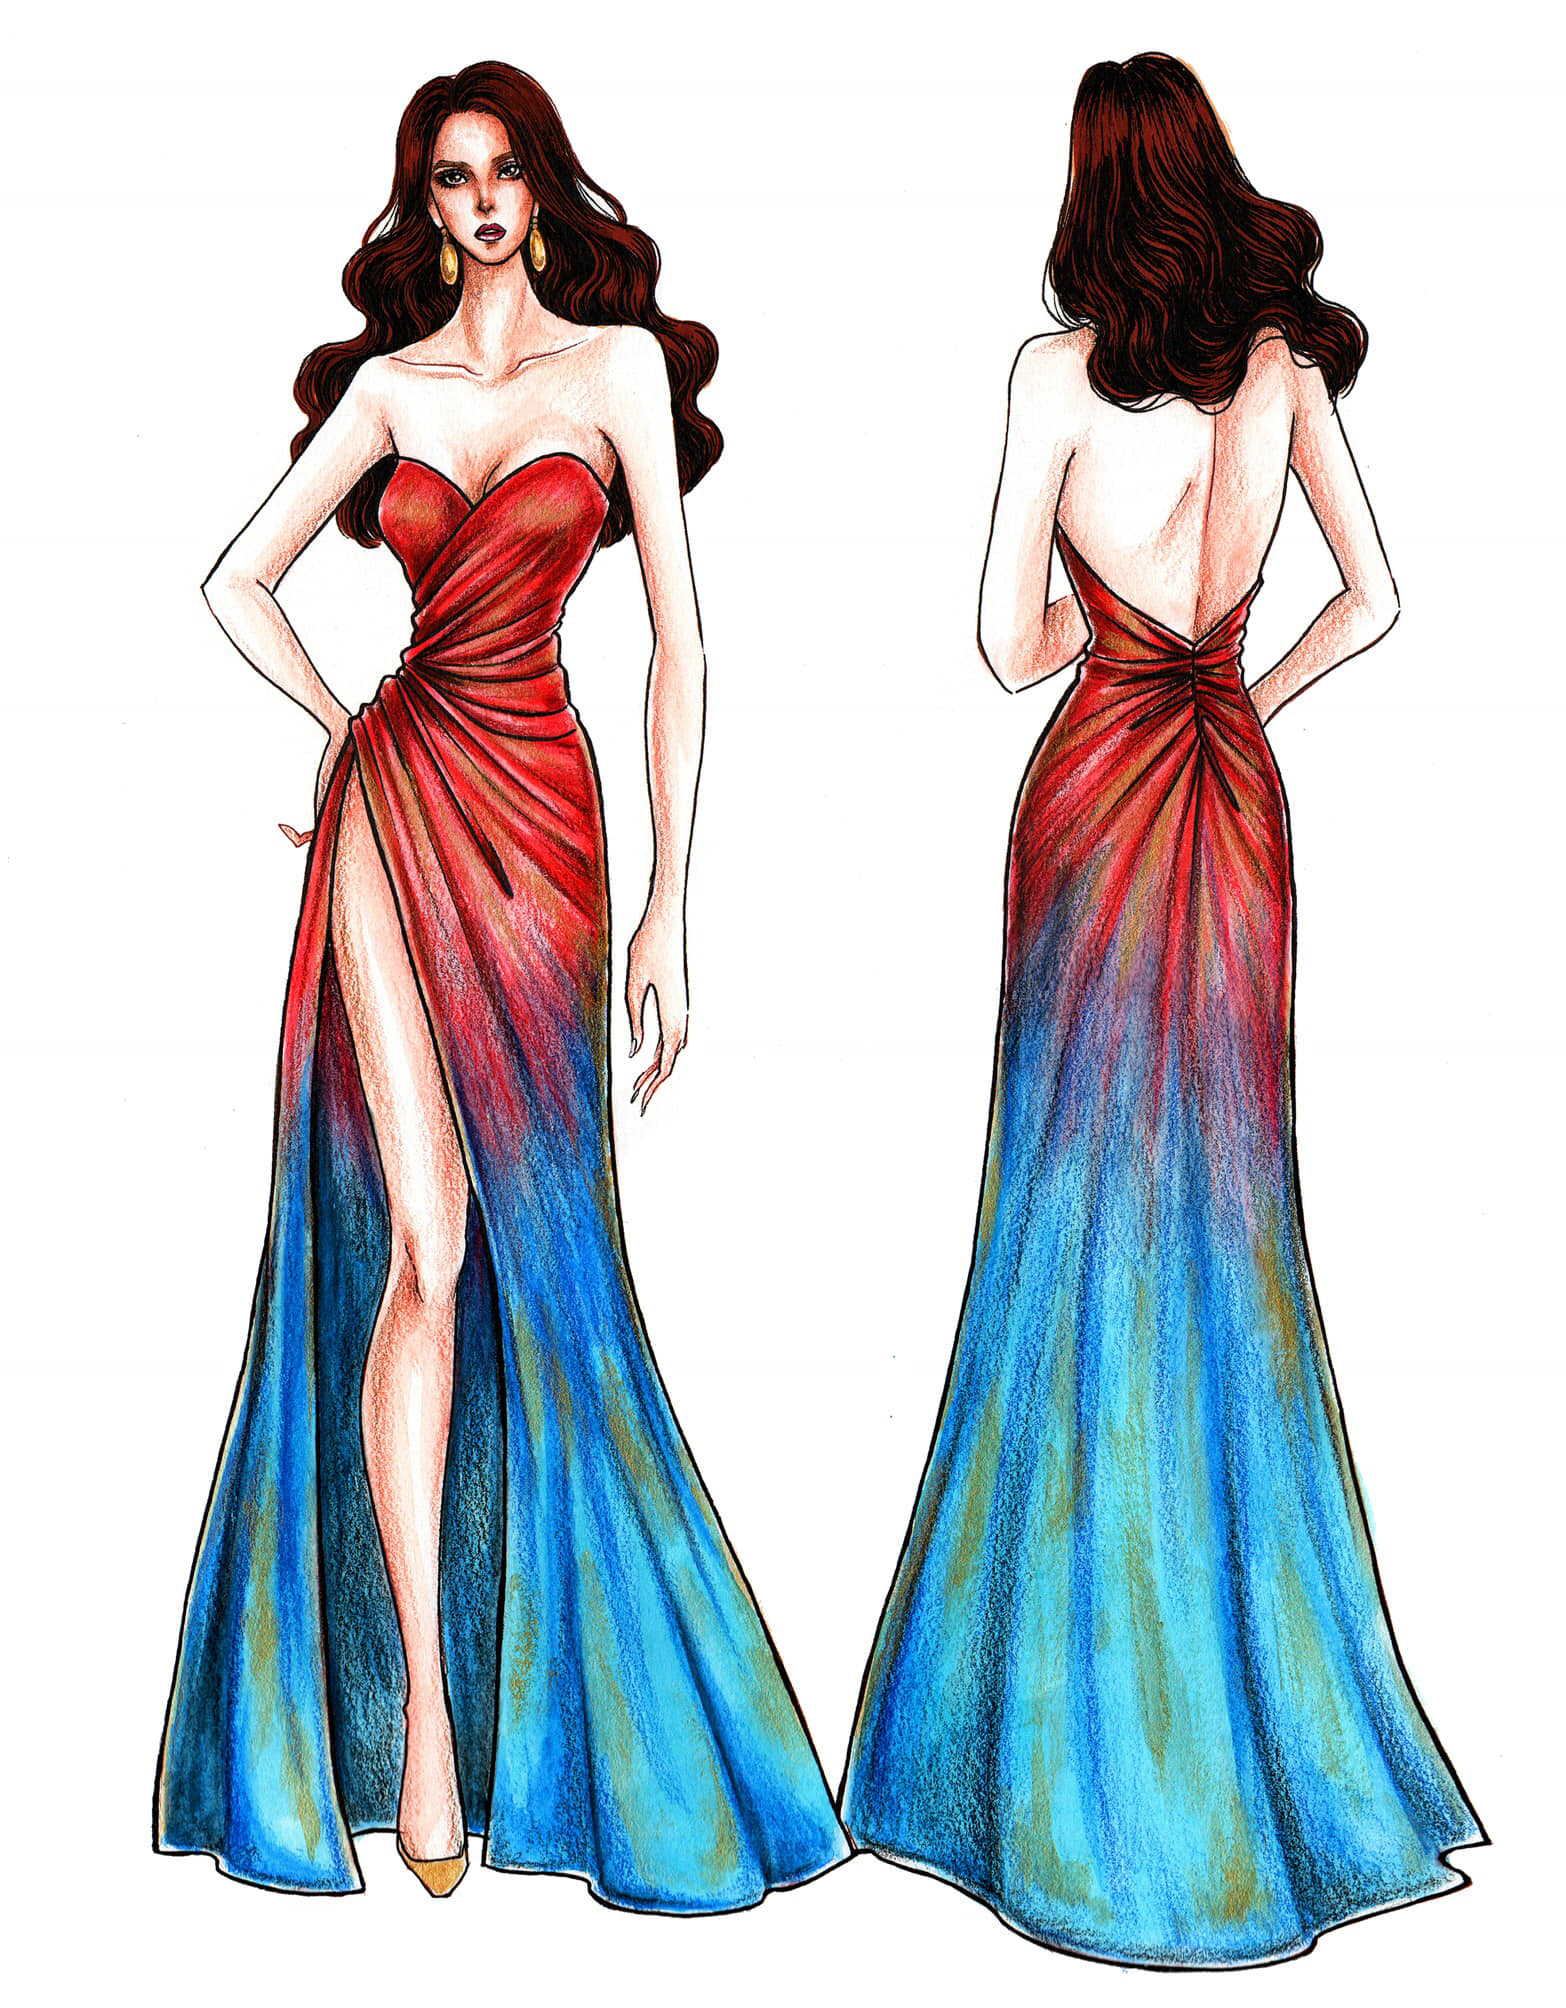 LOOK: Designer Mak Tumang's sketches of Catriona Gray's Miss Universe